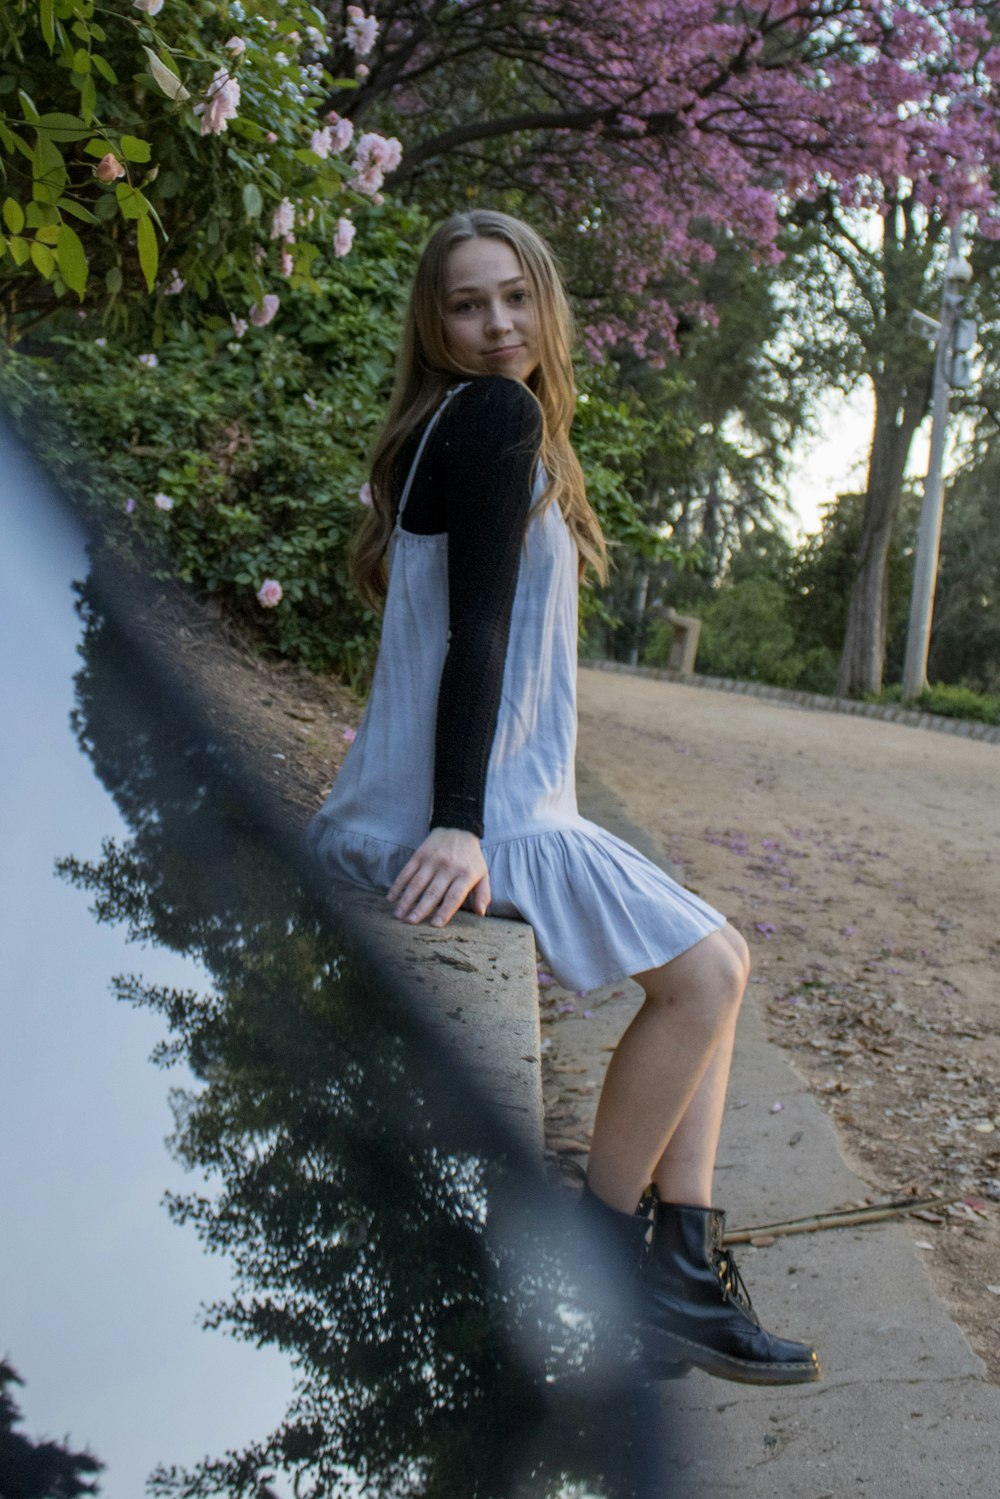 woman in black long sleeve shirt and white skirt sitting on gray concrete pathway during daytime